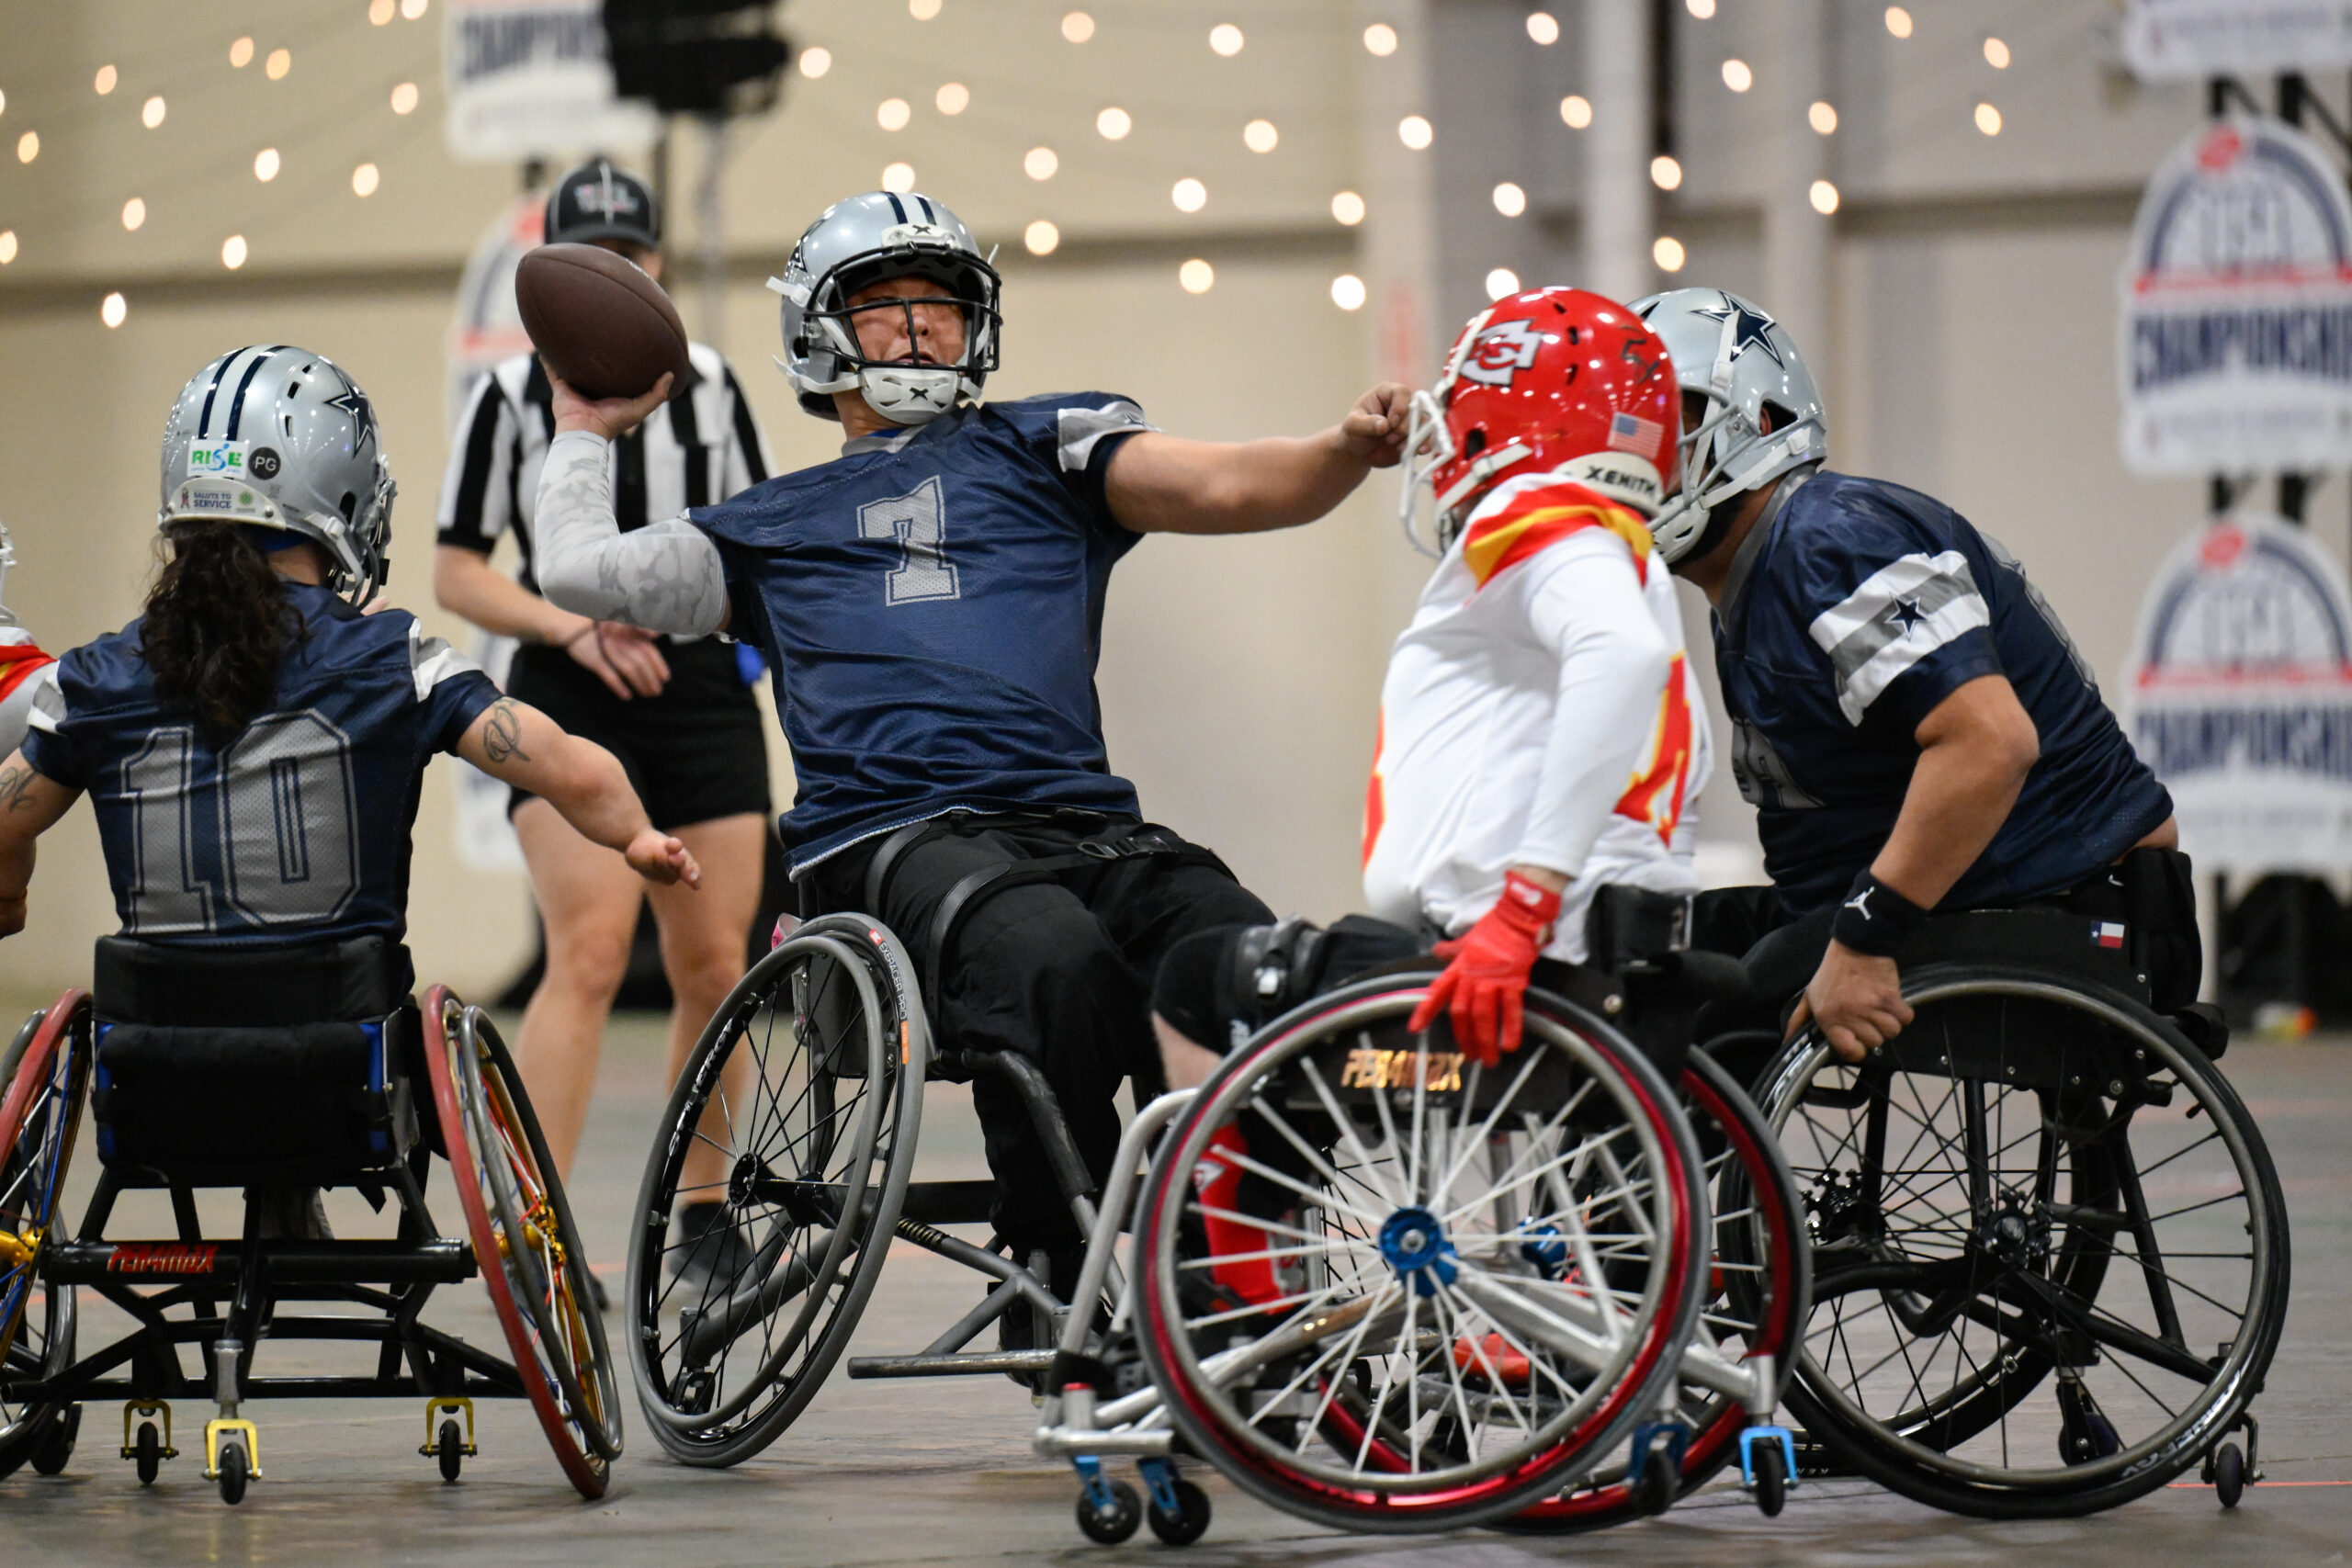 Dallas Cowboys player Jason Rainey launches a pass against the Kansas City Chiefs during the USA Wheelchair Football League Championship, a program of Move United, Tuesday, Feb. 6, 2024 in Dallas, TX. (Photo by Reed Hoffmann for Move United)